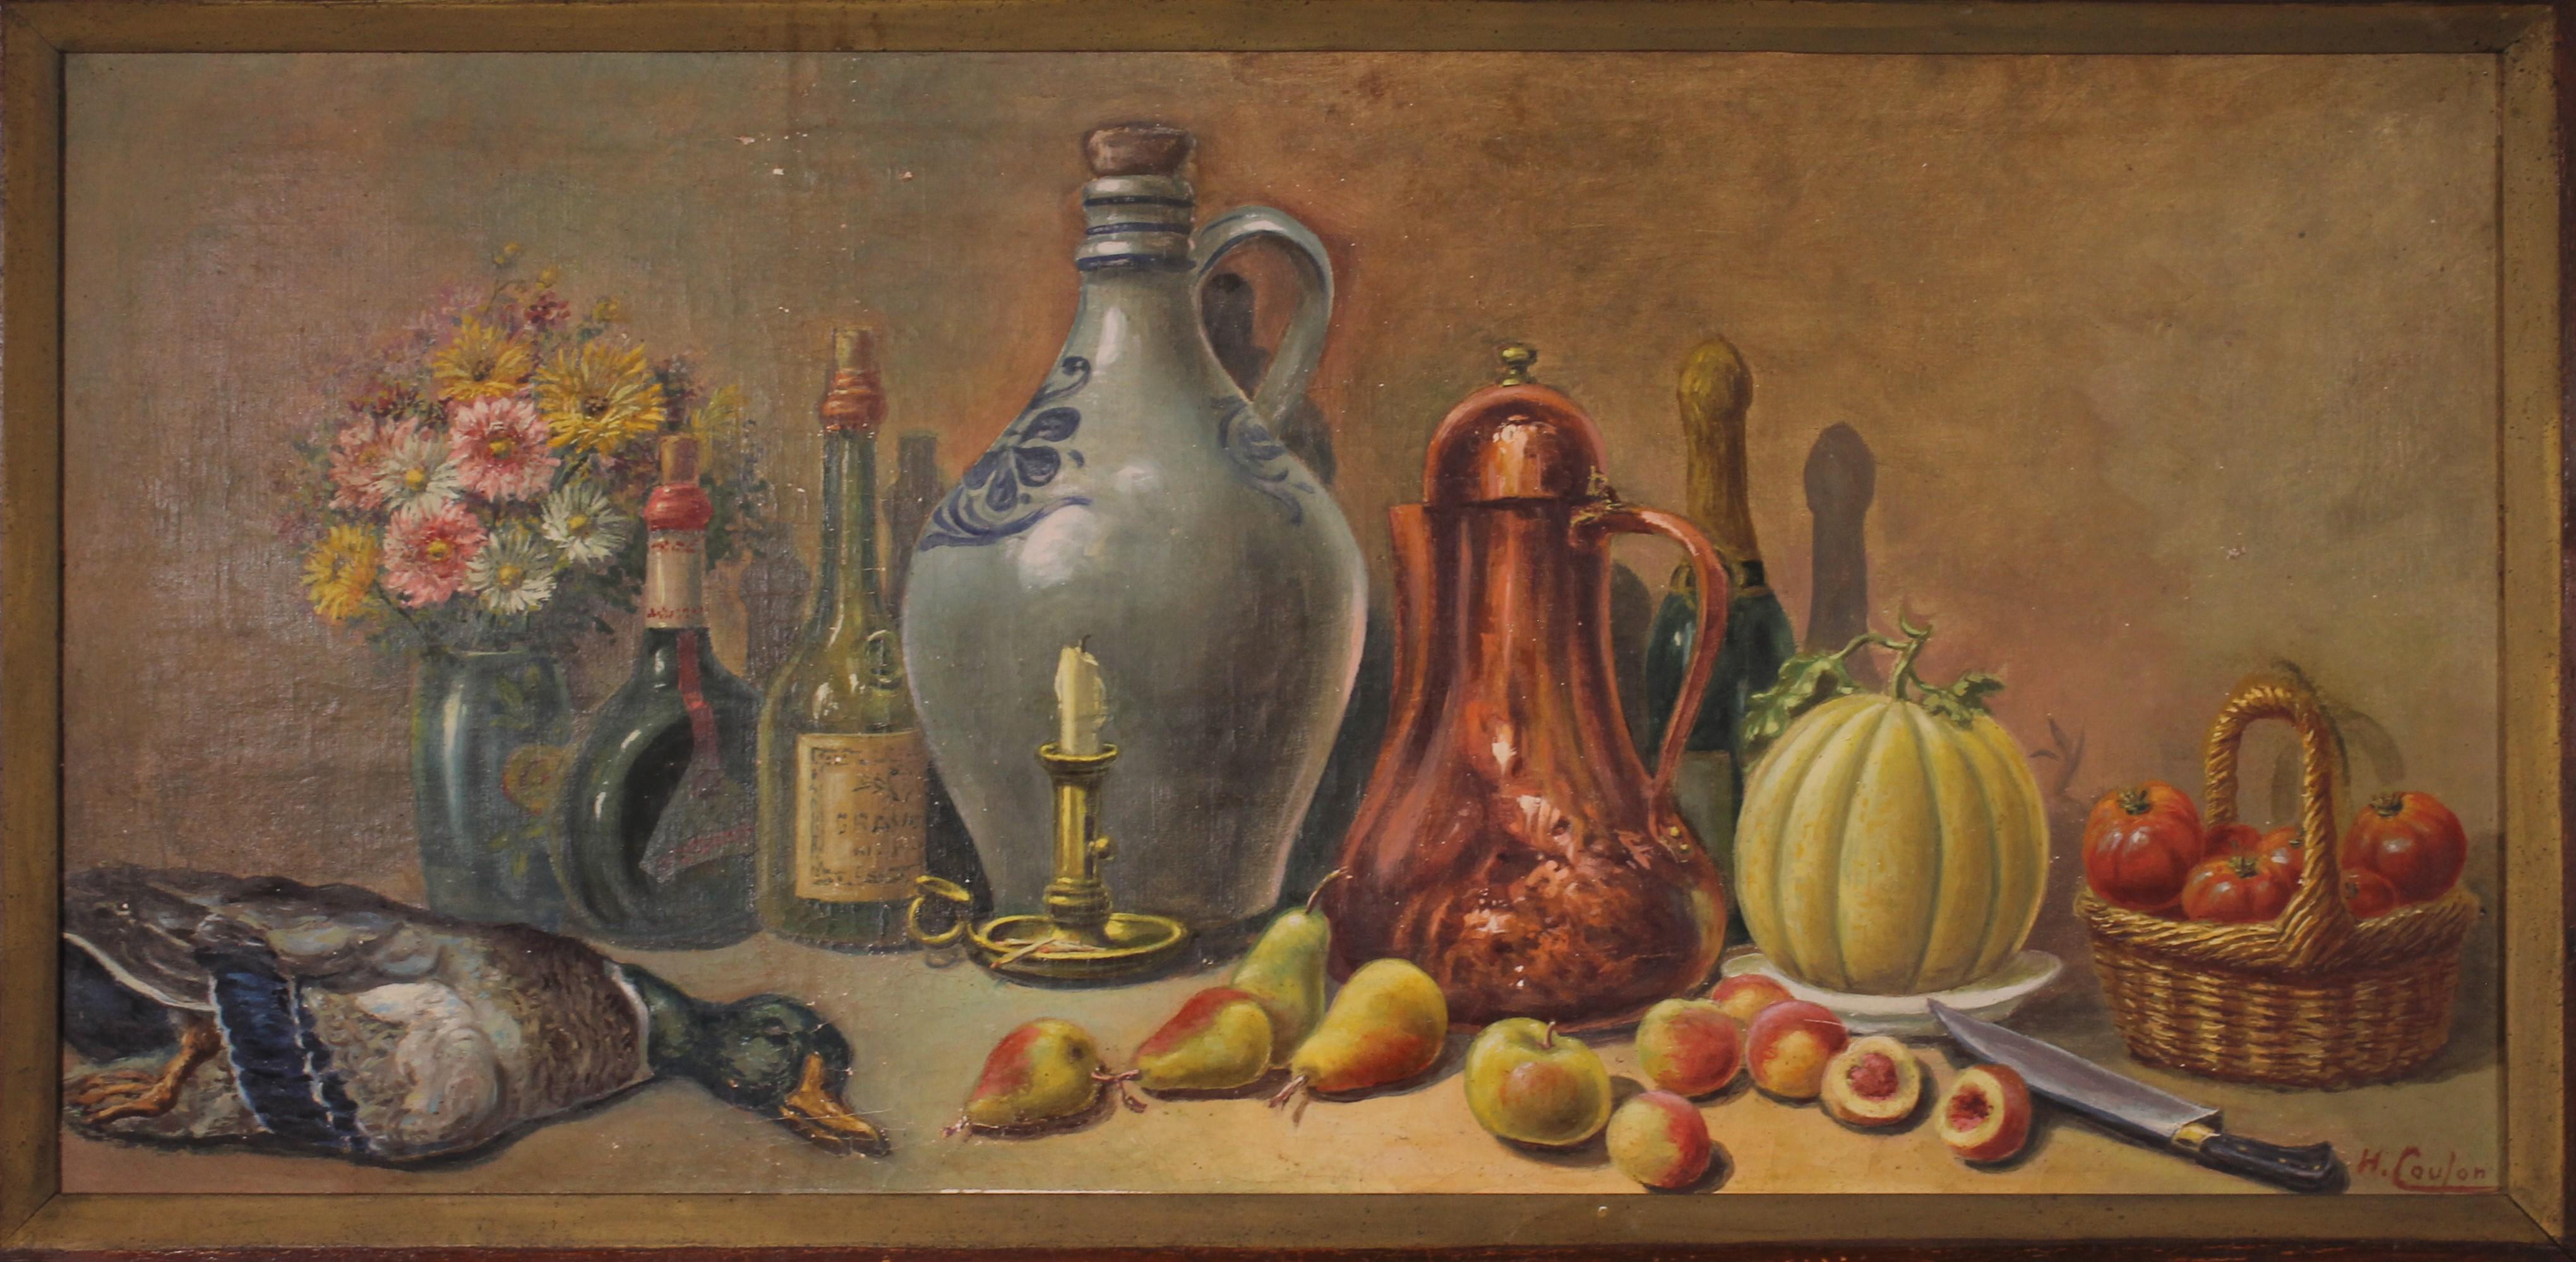 oil on canvas representing a still life with fruits, flowers and game in a wooden frame signed H.Coulon
Large model
In good condition and beautiful patina
